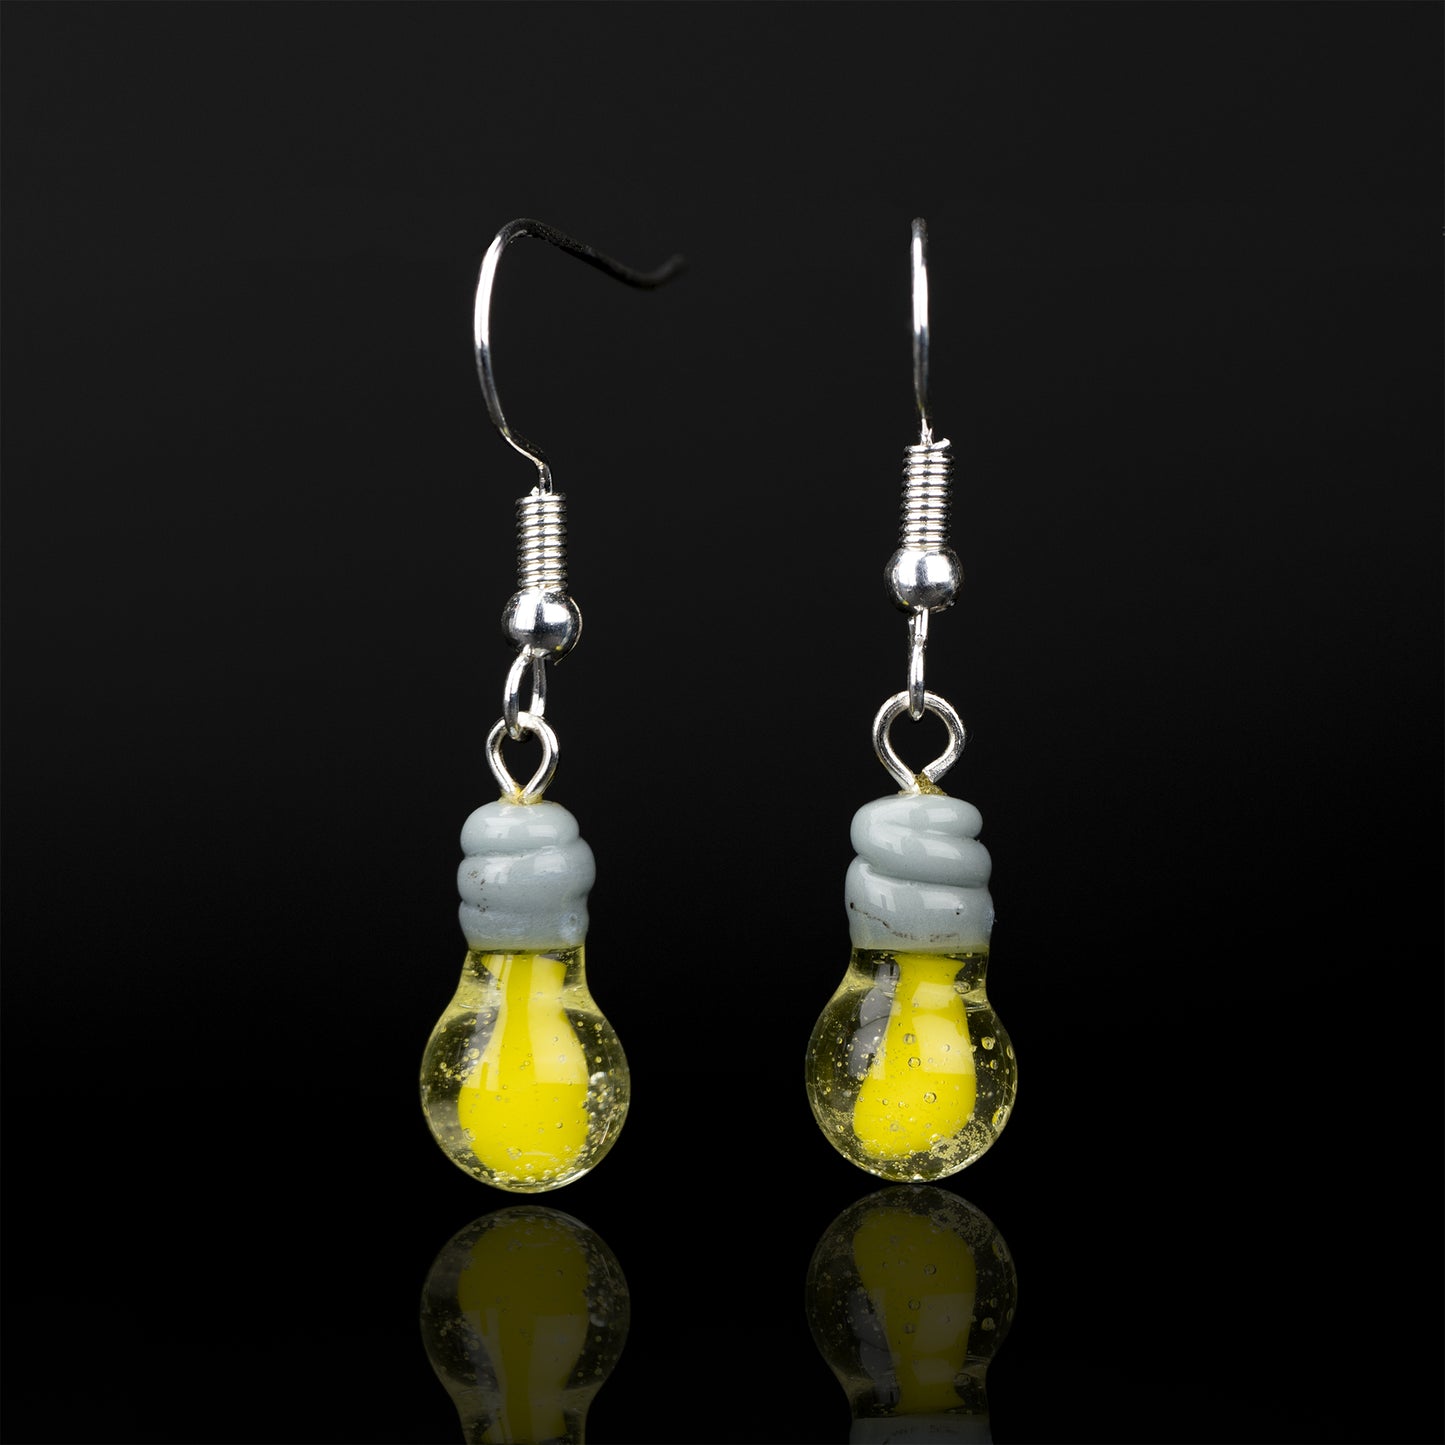 Two light bulb dangle earrings against a black background. The light bulbs havea clear and yellow bulb and grey thread. attached to the thread is a sterling silver earring hook.